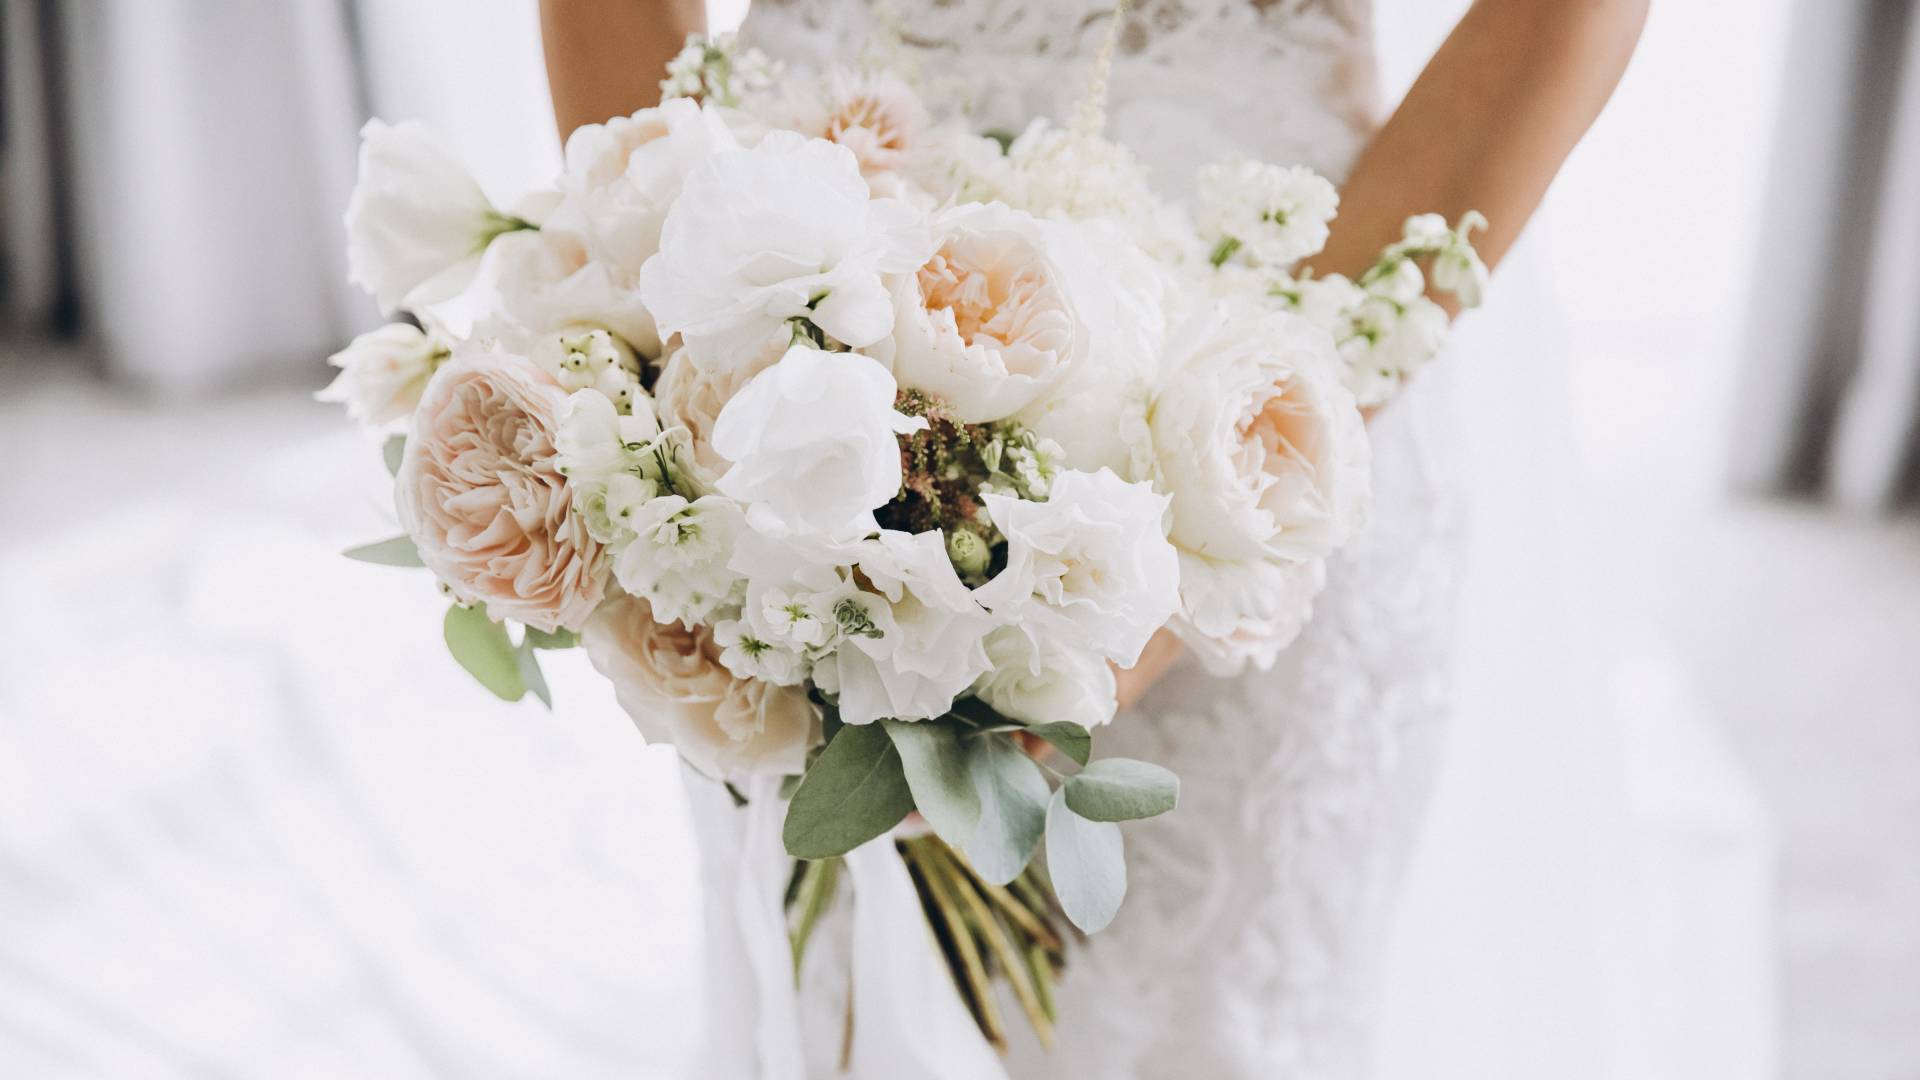 View of wedding bouquet